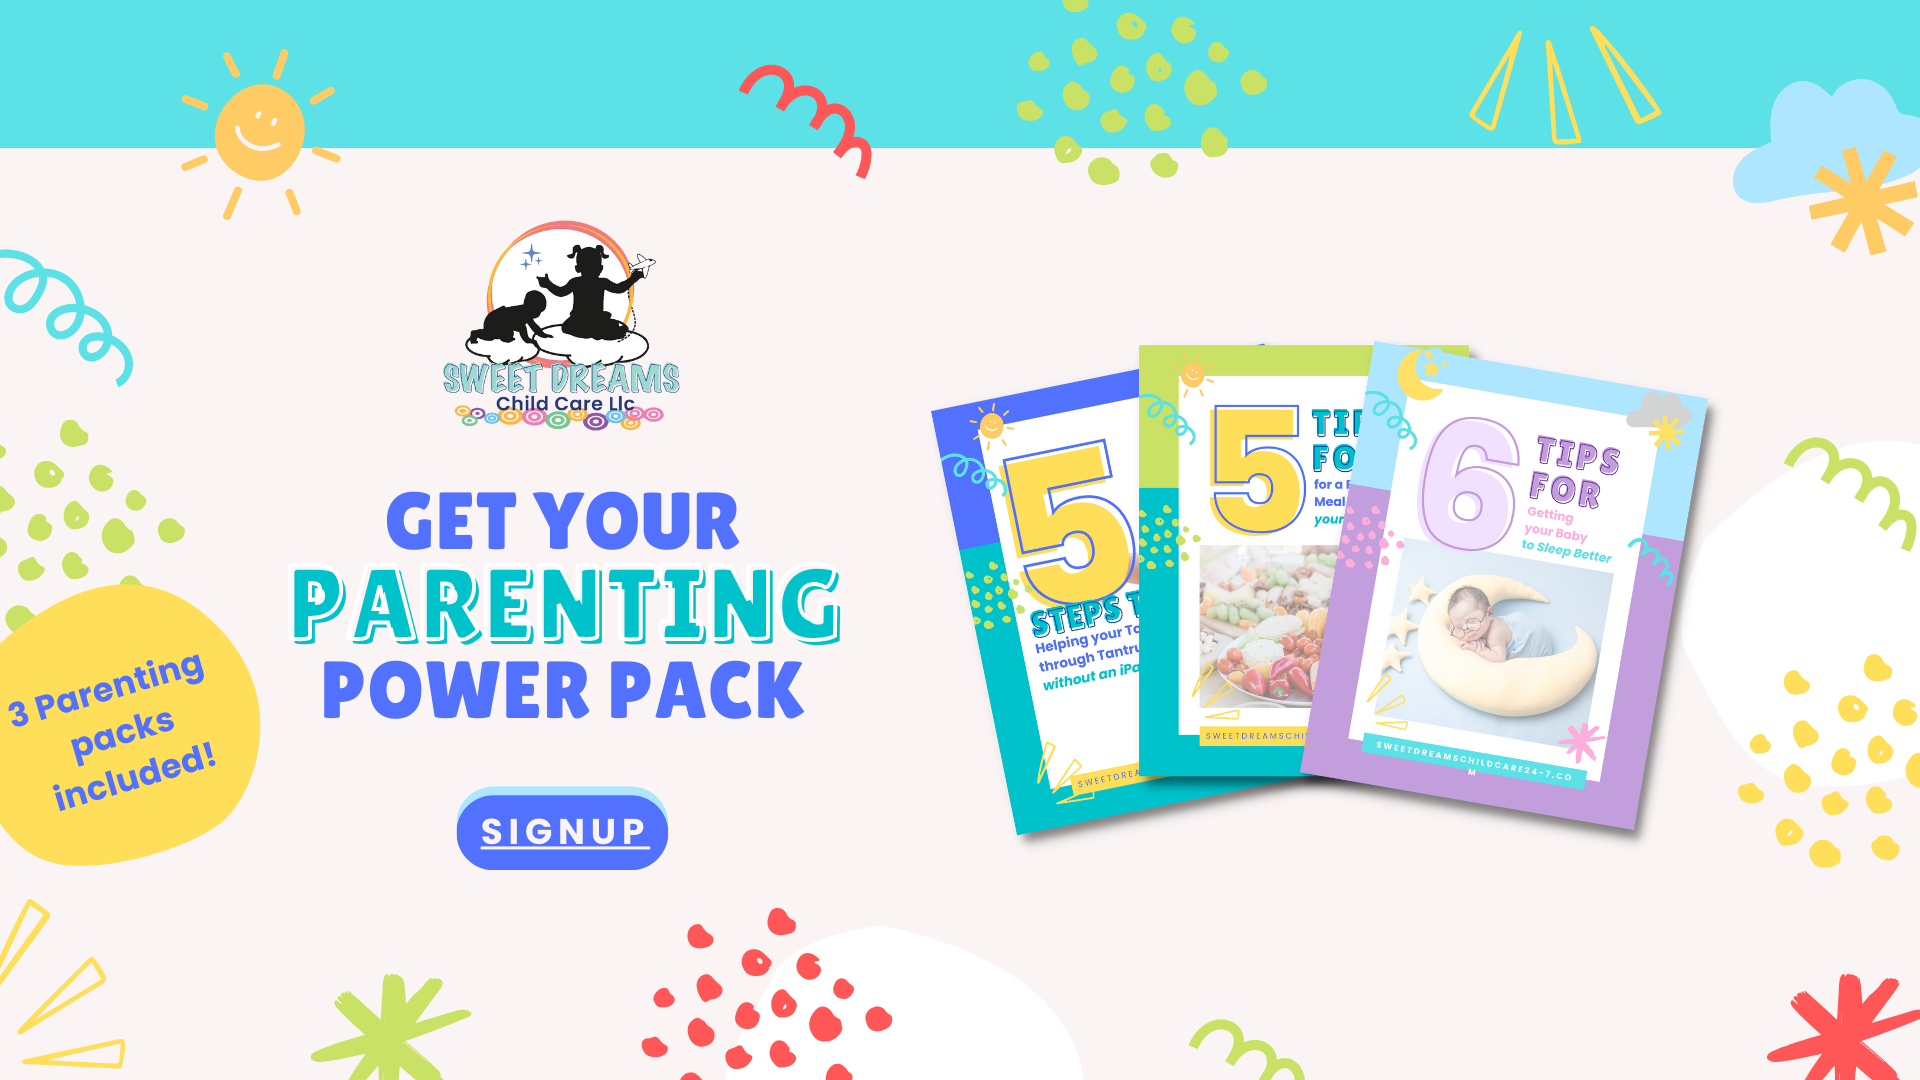 Parenting Power PAck to help parents with their babies or toddlers sleep, meal times and tantrums